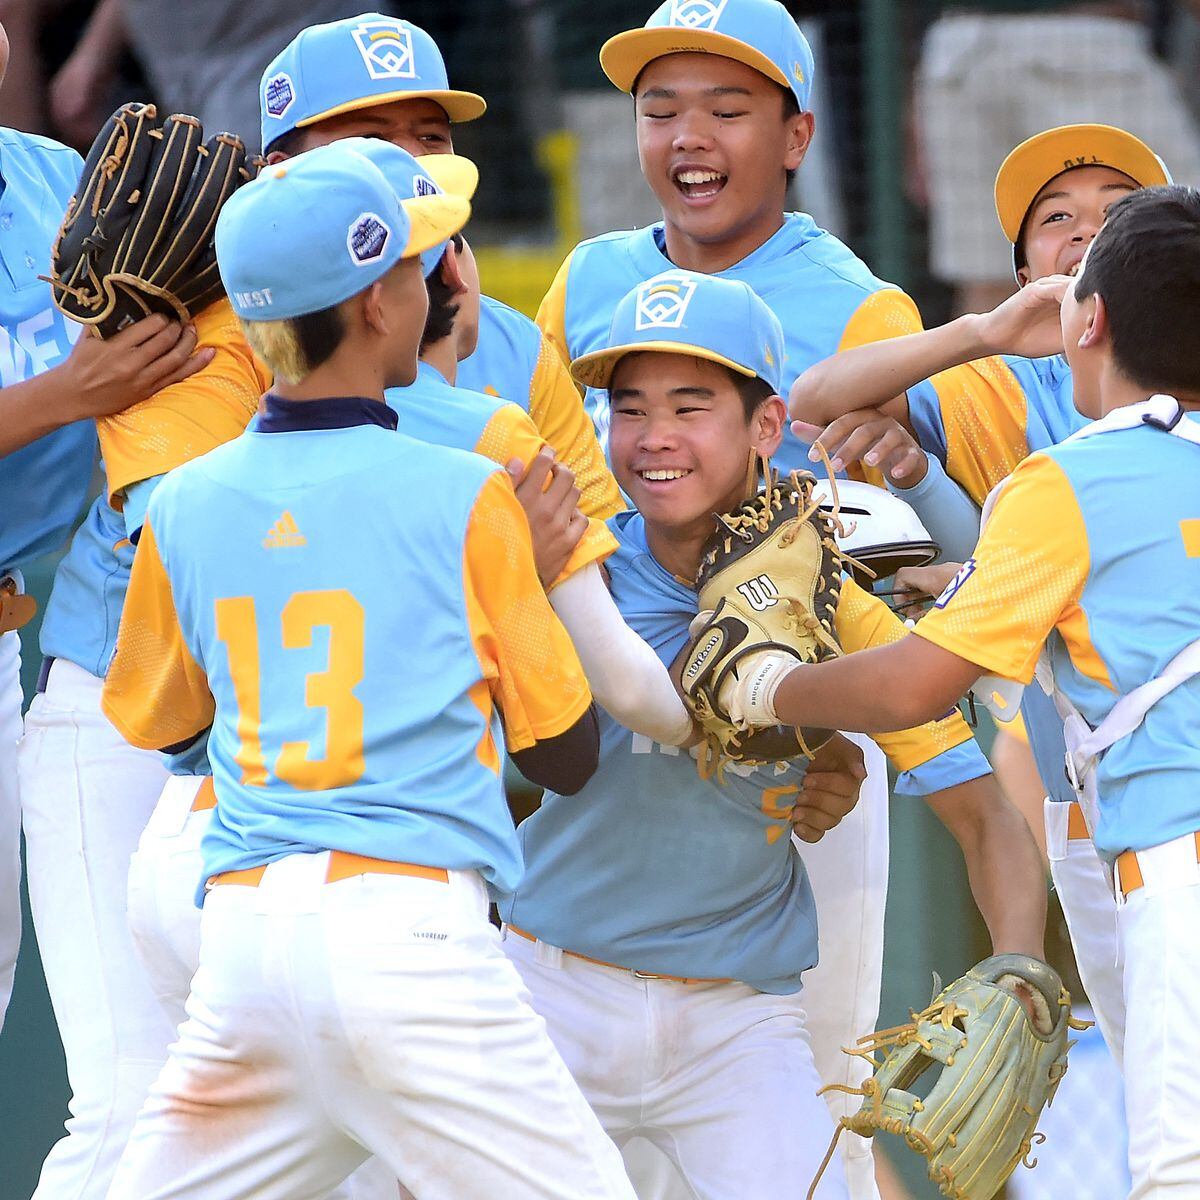 Nolensville Little League in the 2022 LLWS in photos